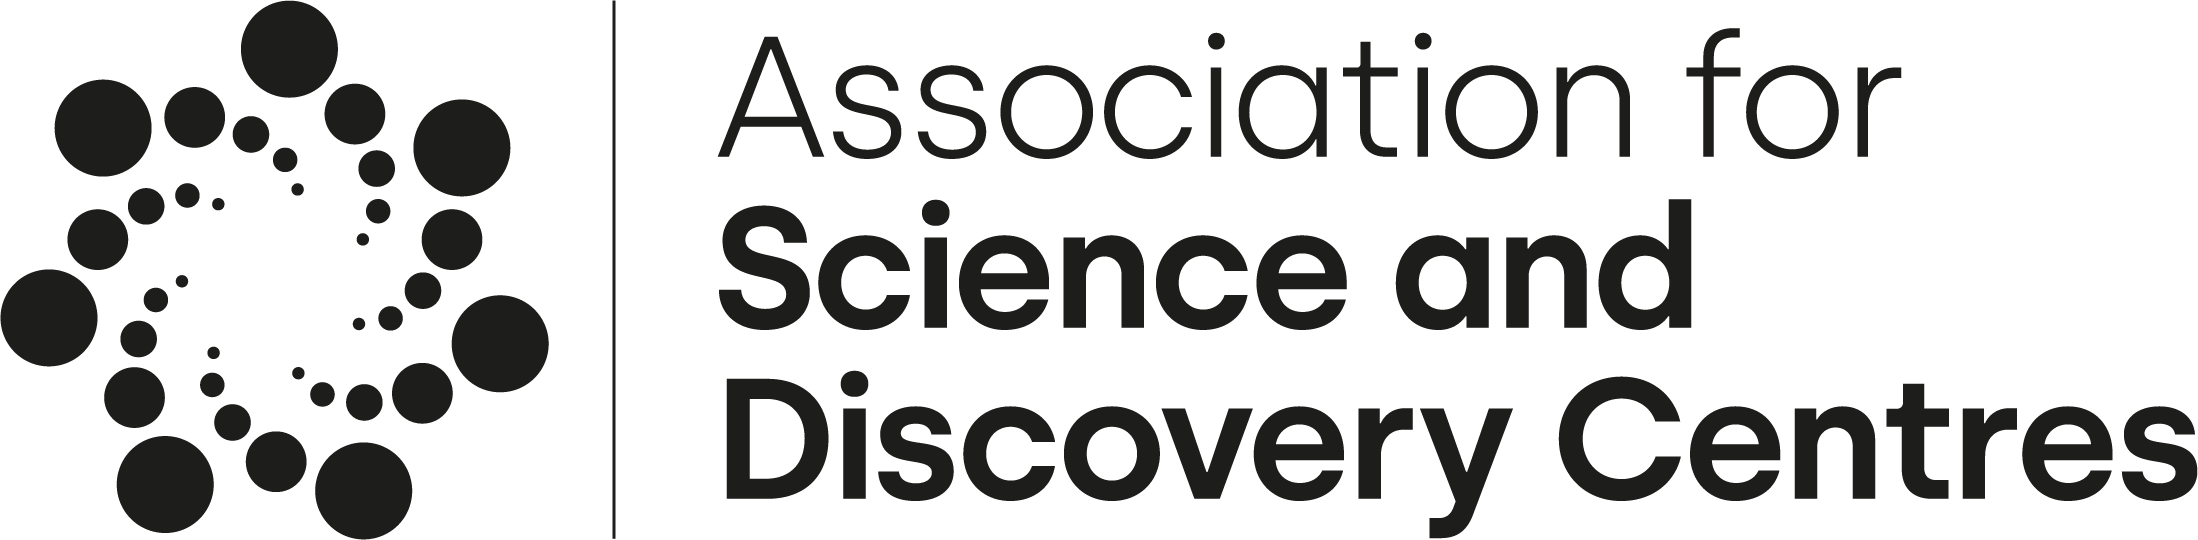 association for science and discovery centres